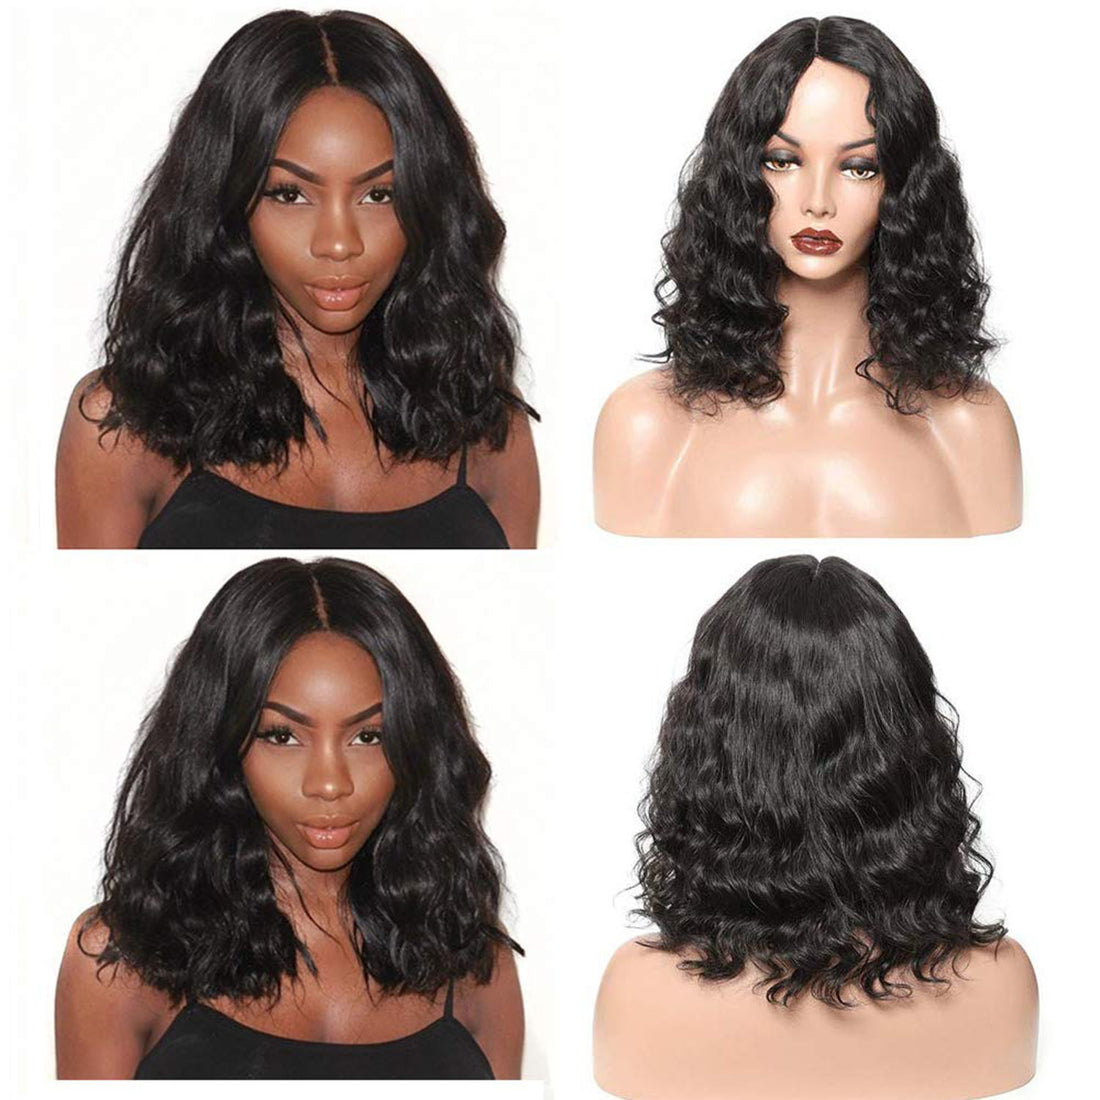 Body Wave Short Bob Wigs 13x4 Brazilian Lace Front Human Hair Wigs Pre Plucked Hairline 150% Density - Rose Hair